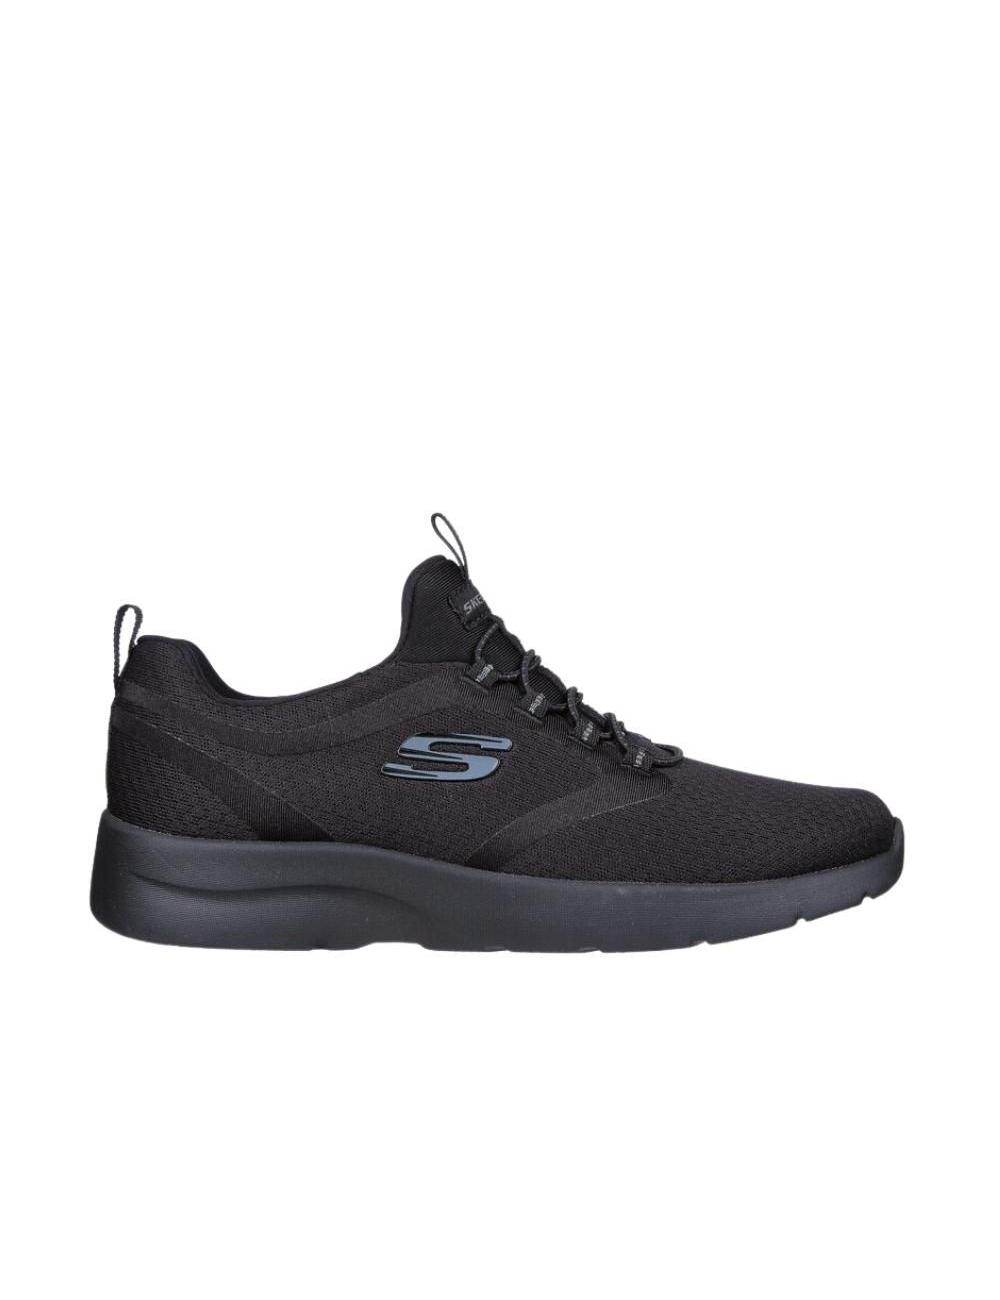 SKECHERS DYNAMIGHT 2.0 - SOFT EXPRESSI MUJER